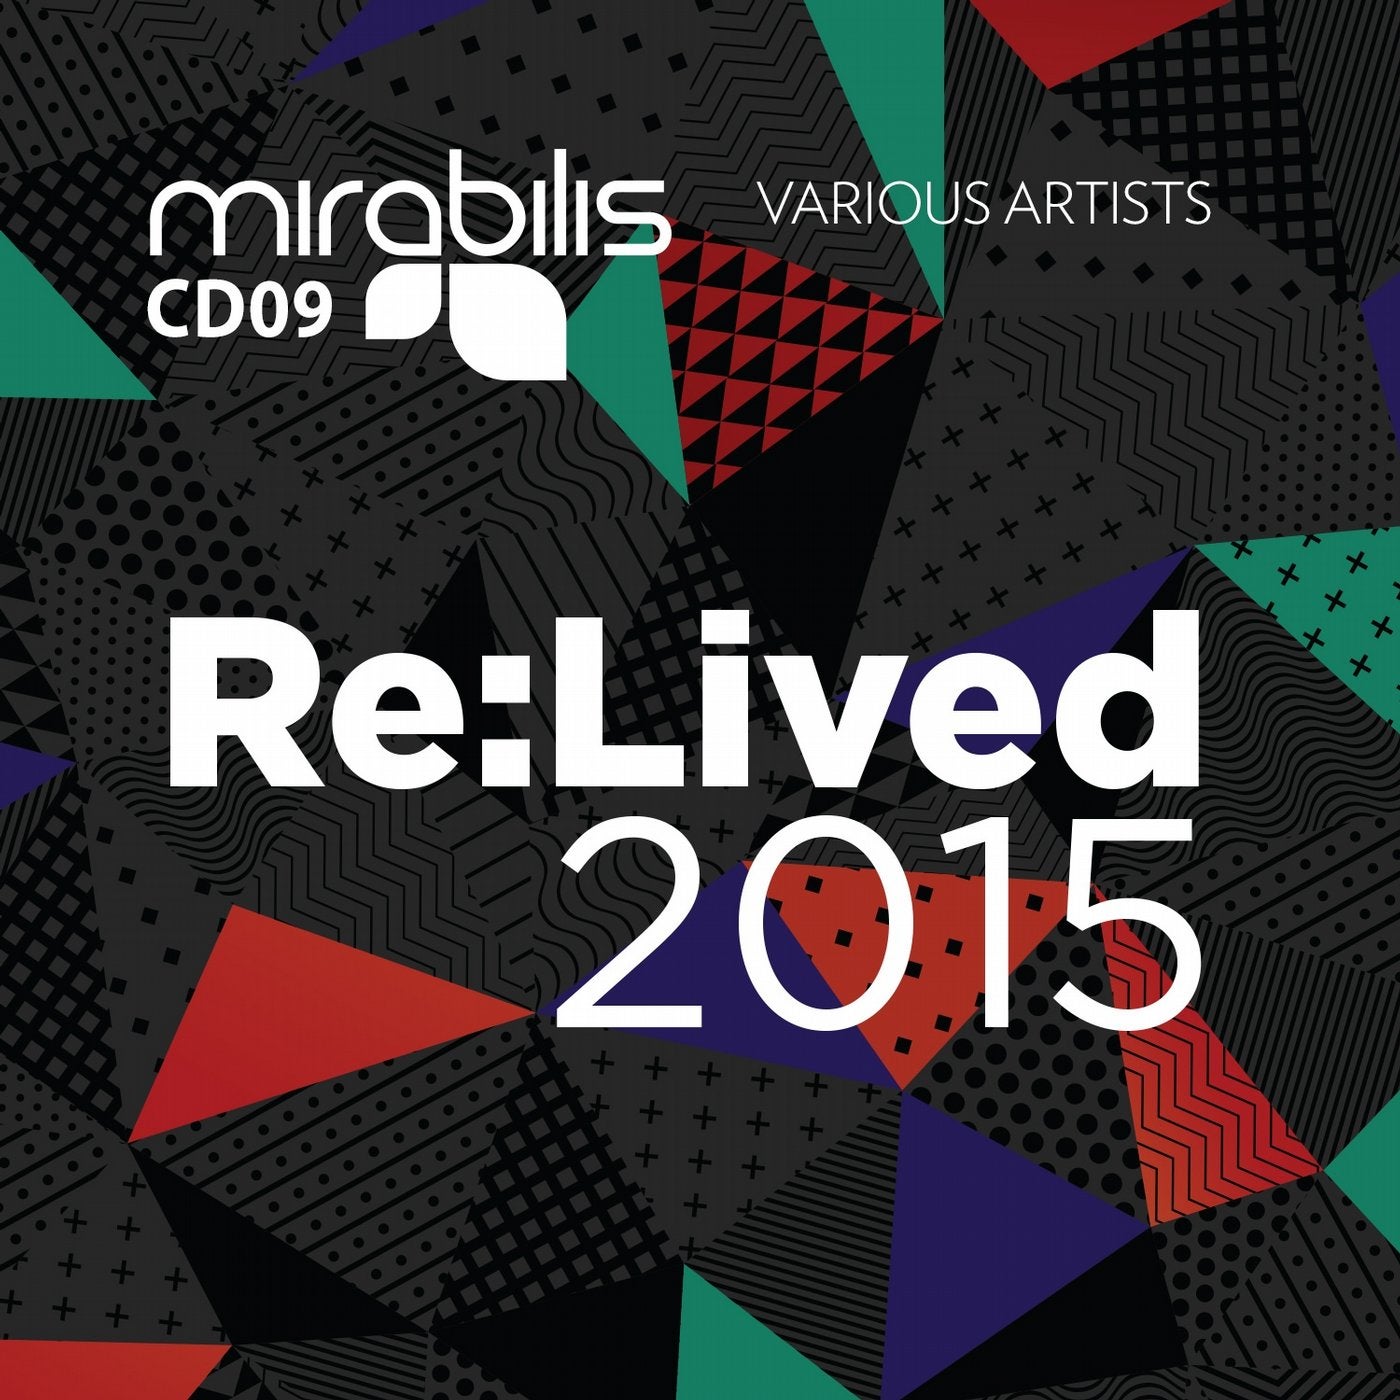 Re:Lived 2015